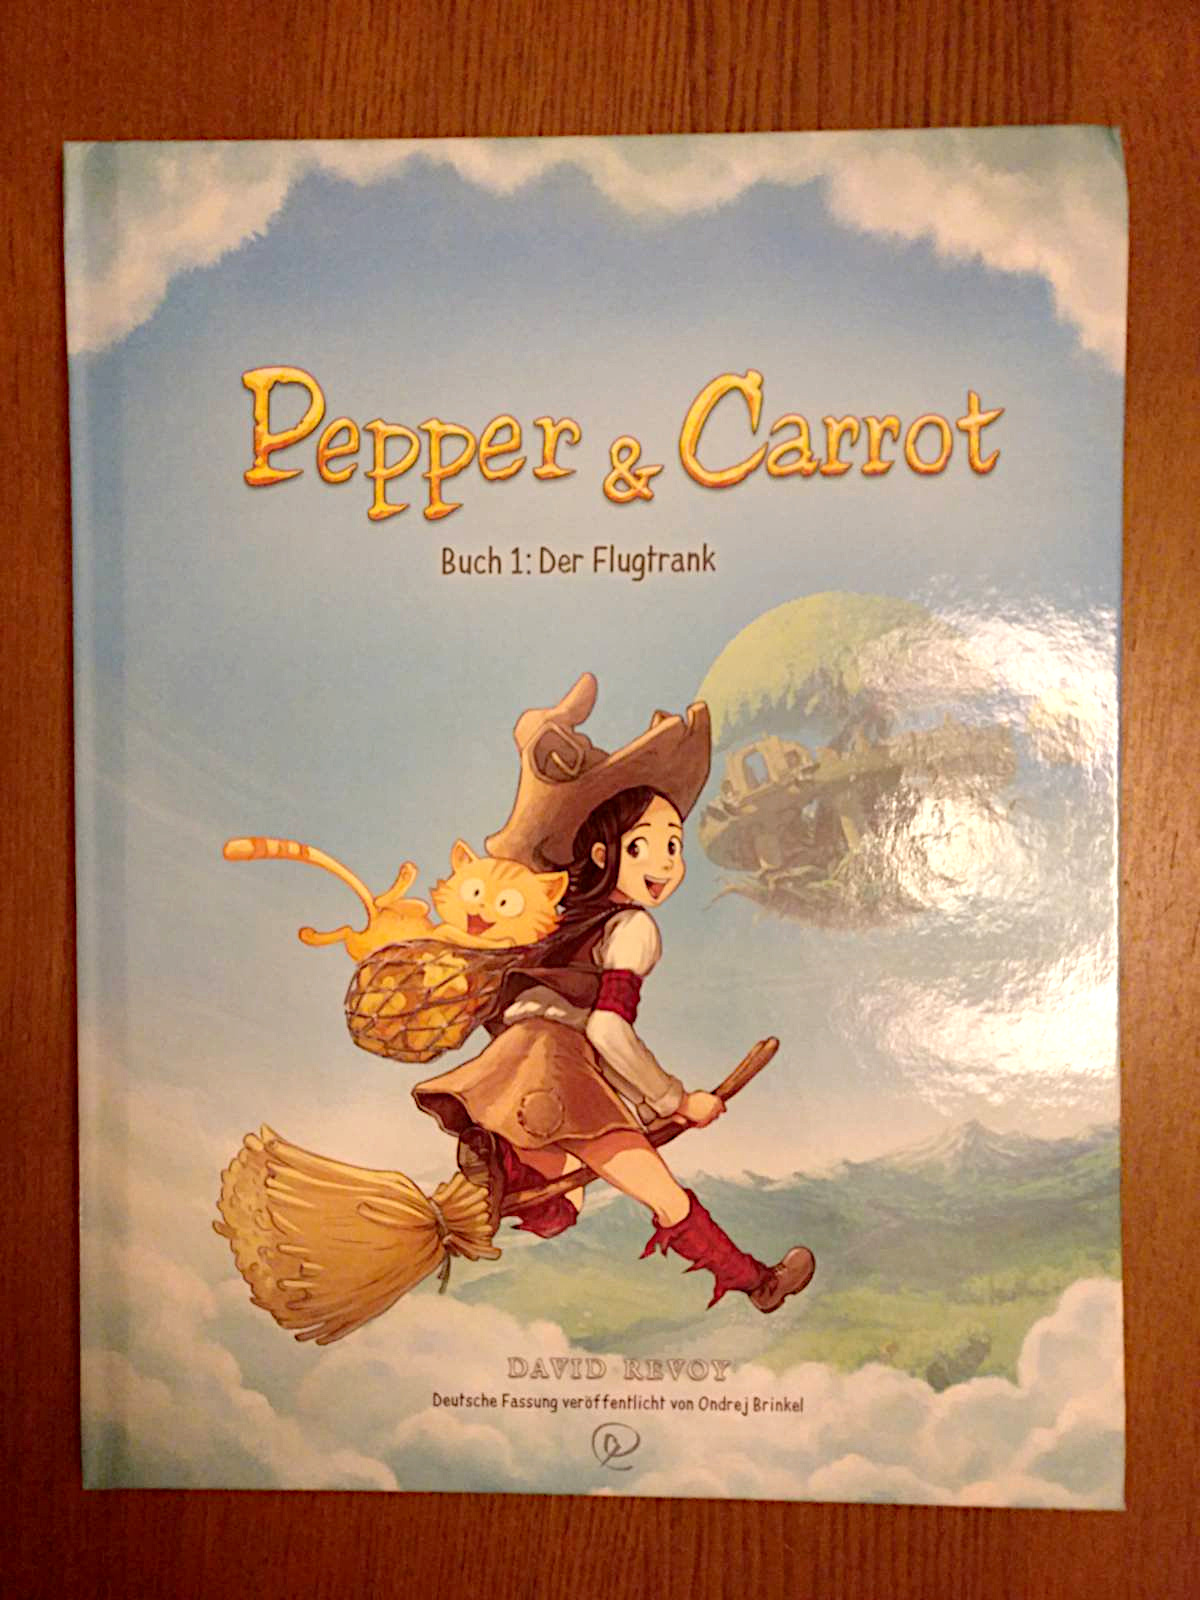 Hardcover of the German Version of Pepper & Carrot Book 1